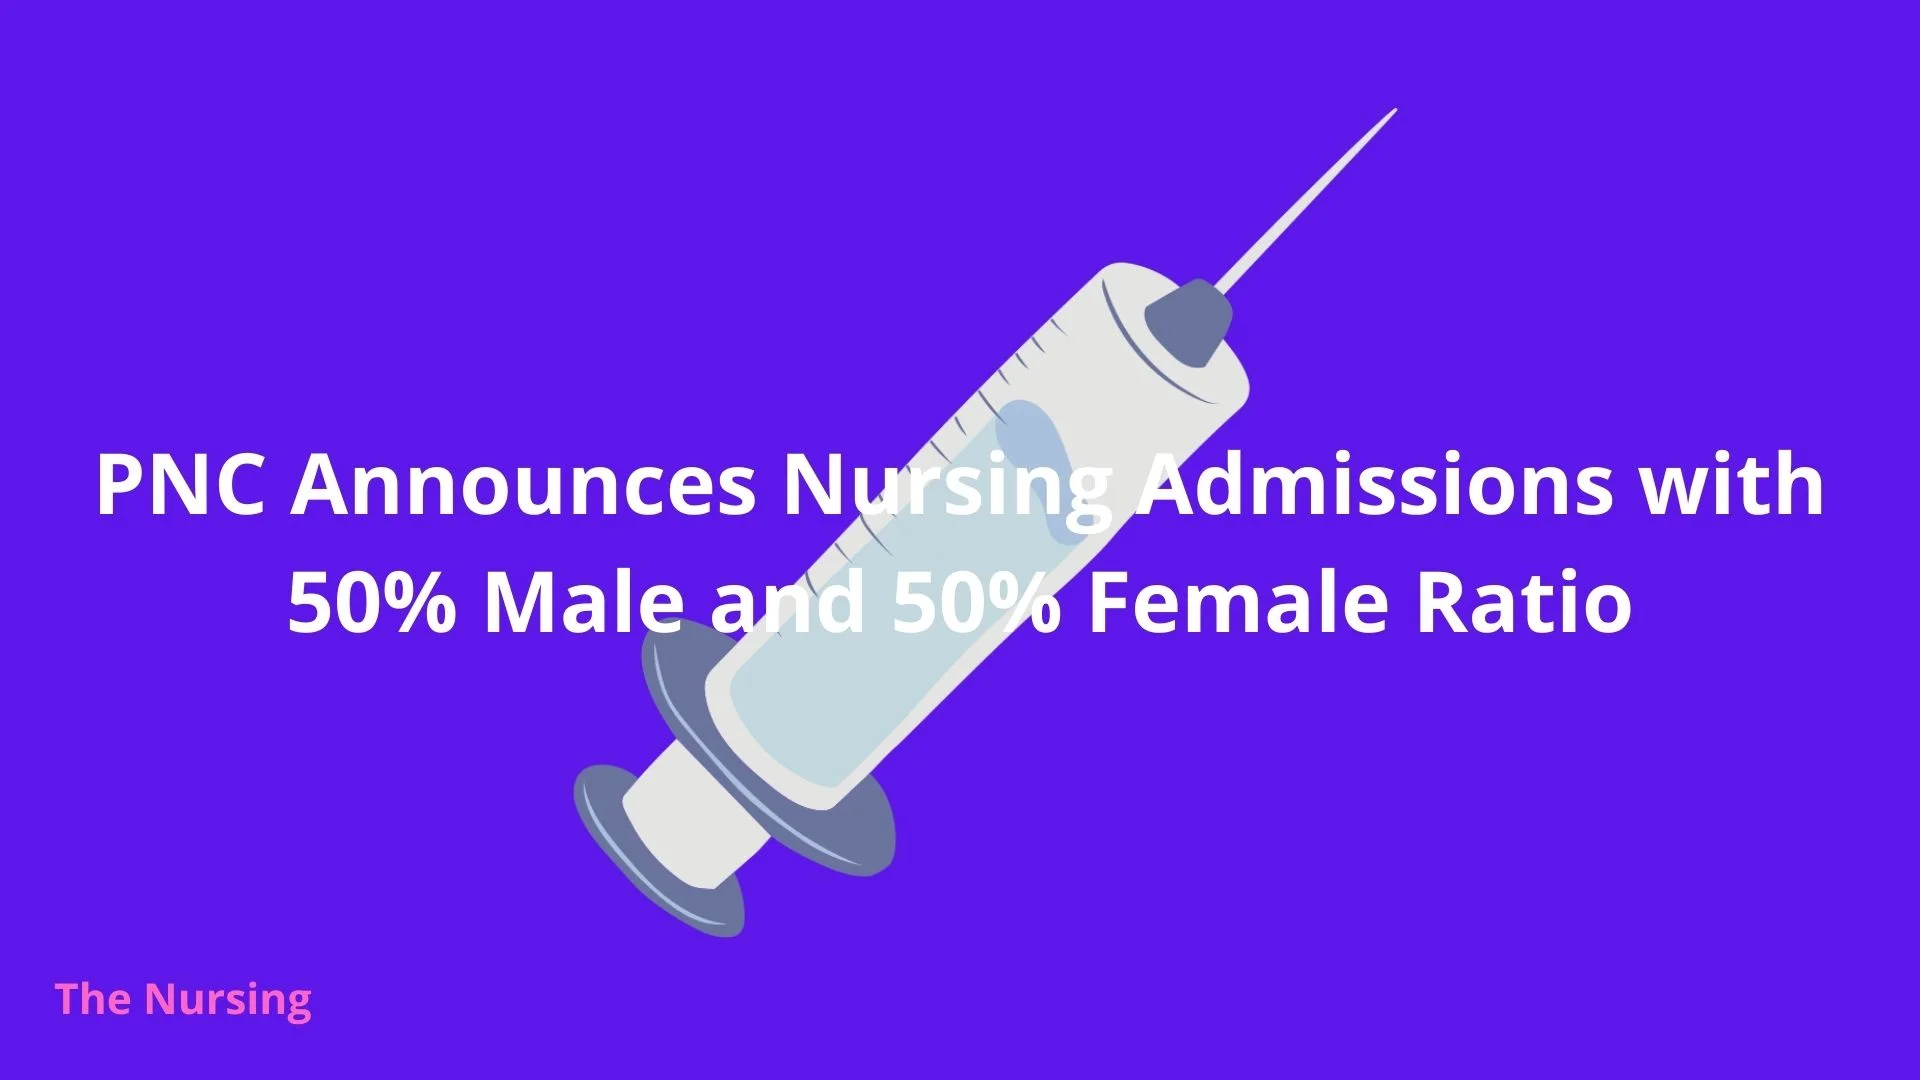 PNC-Announces-Nursing-Admissions-with-50-Male-and-50-Female-Ratio.webp